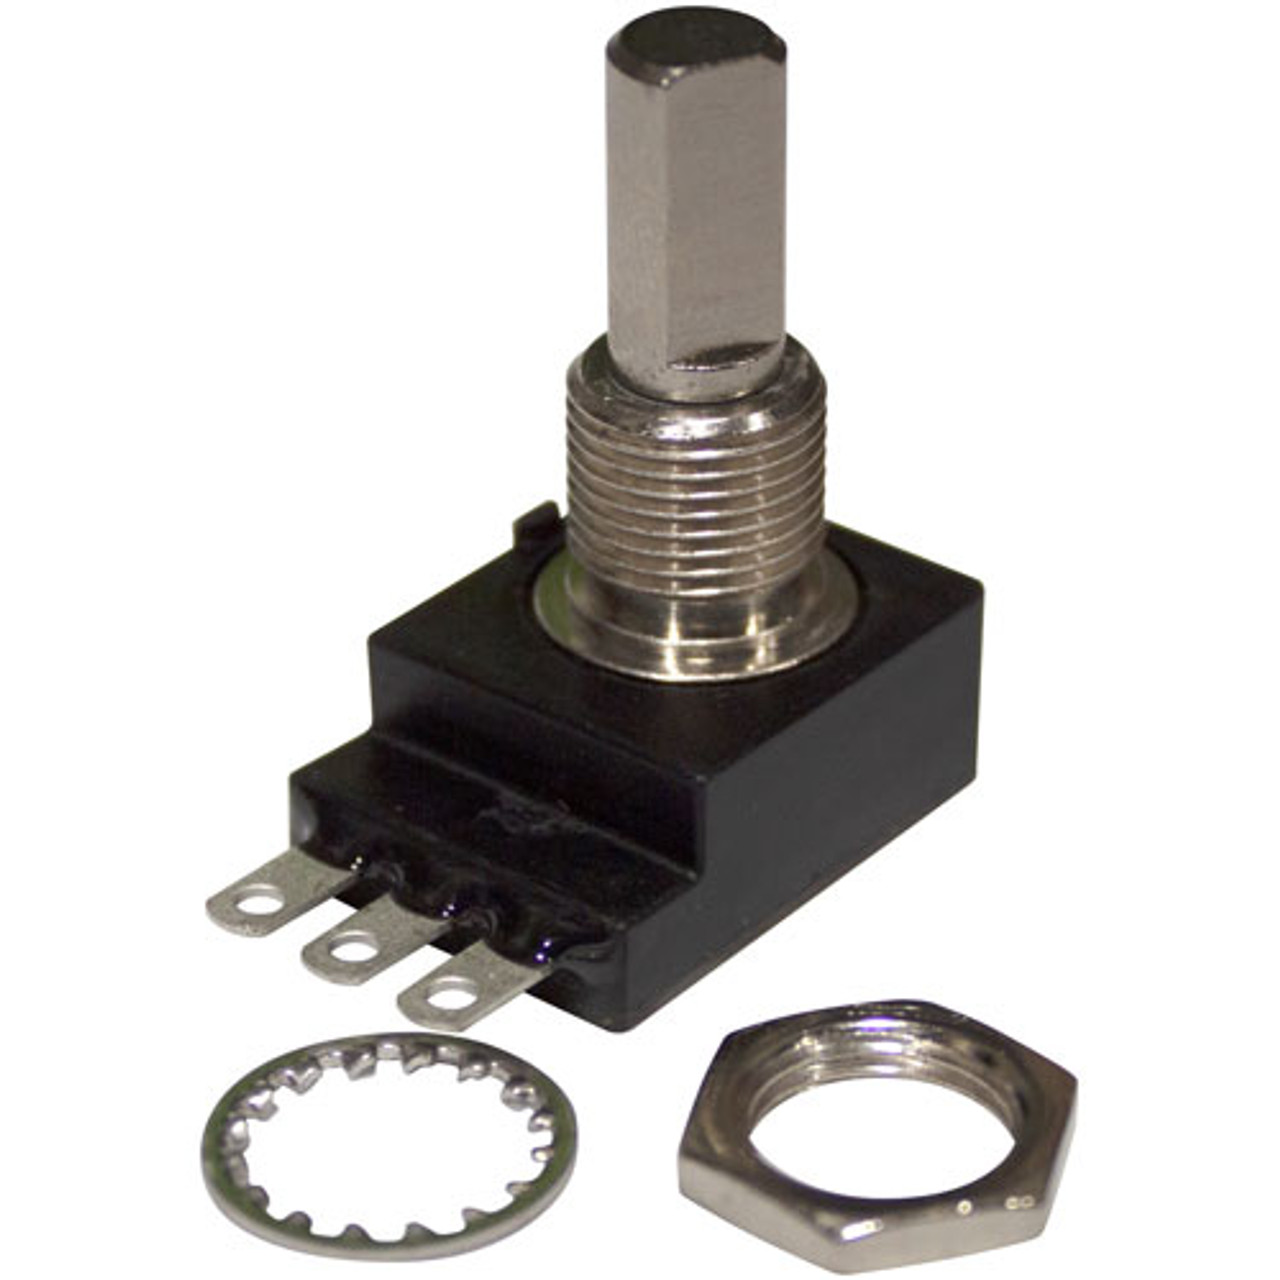 Potentiometer - Replacement Part For Wood Stone 7000-0894-1